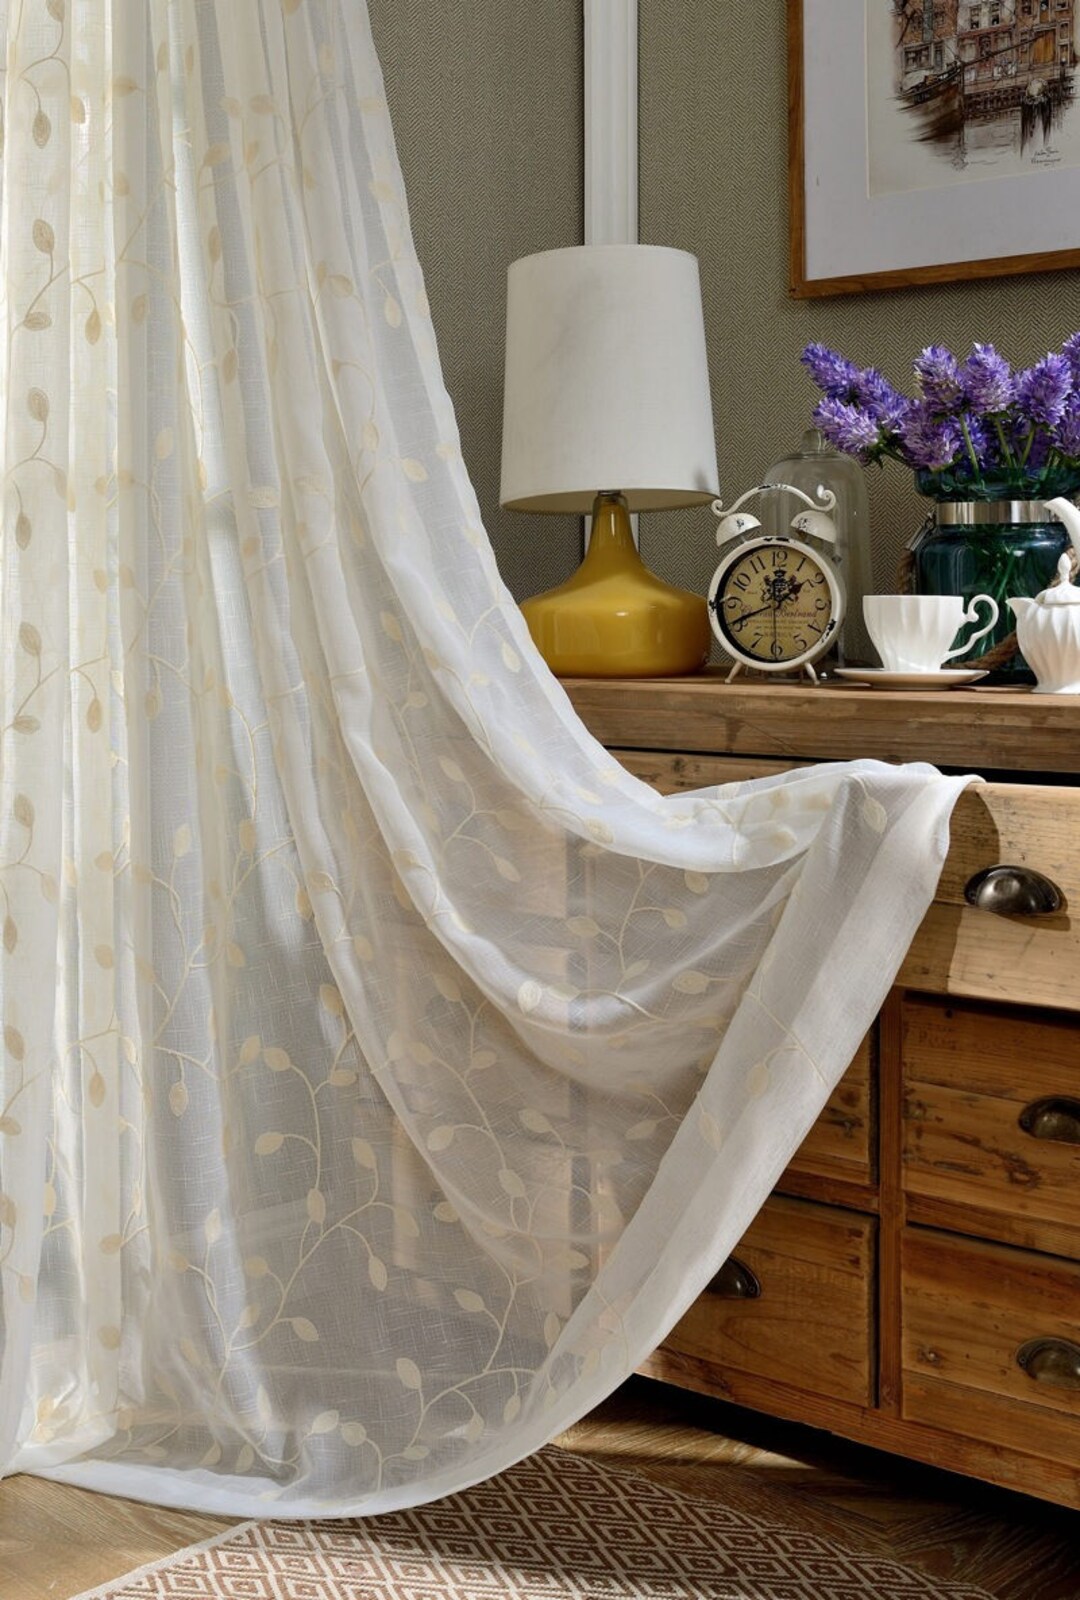 Light Brown Jacquard Net Sheer Curtain Voile Panel. One Custom Made Panel.  Choose Width and Length. Made to Order. Jacquard Floral Pattern. 